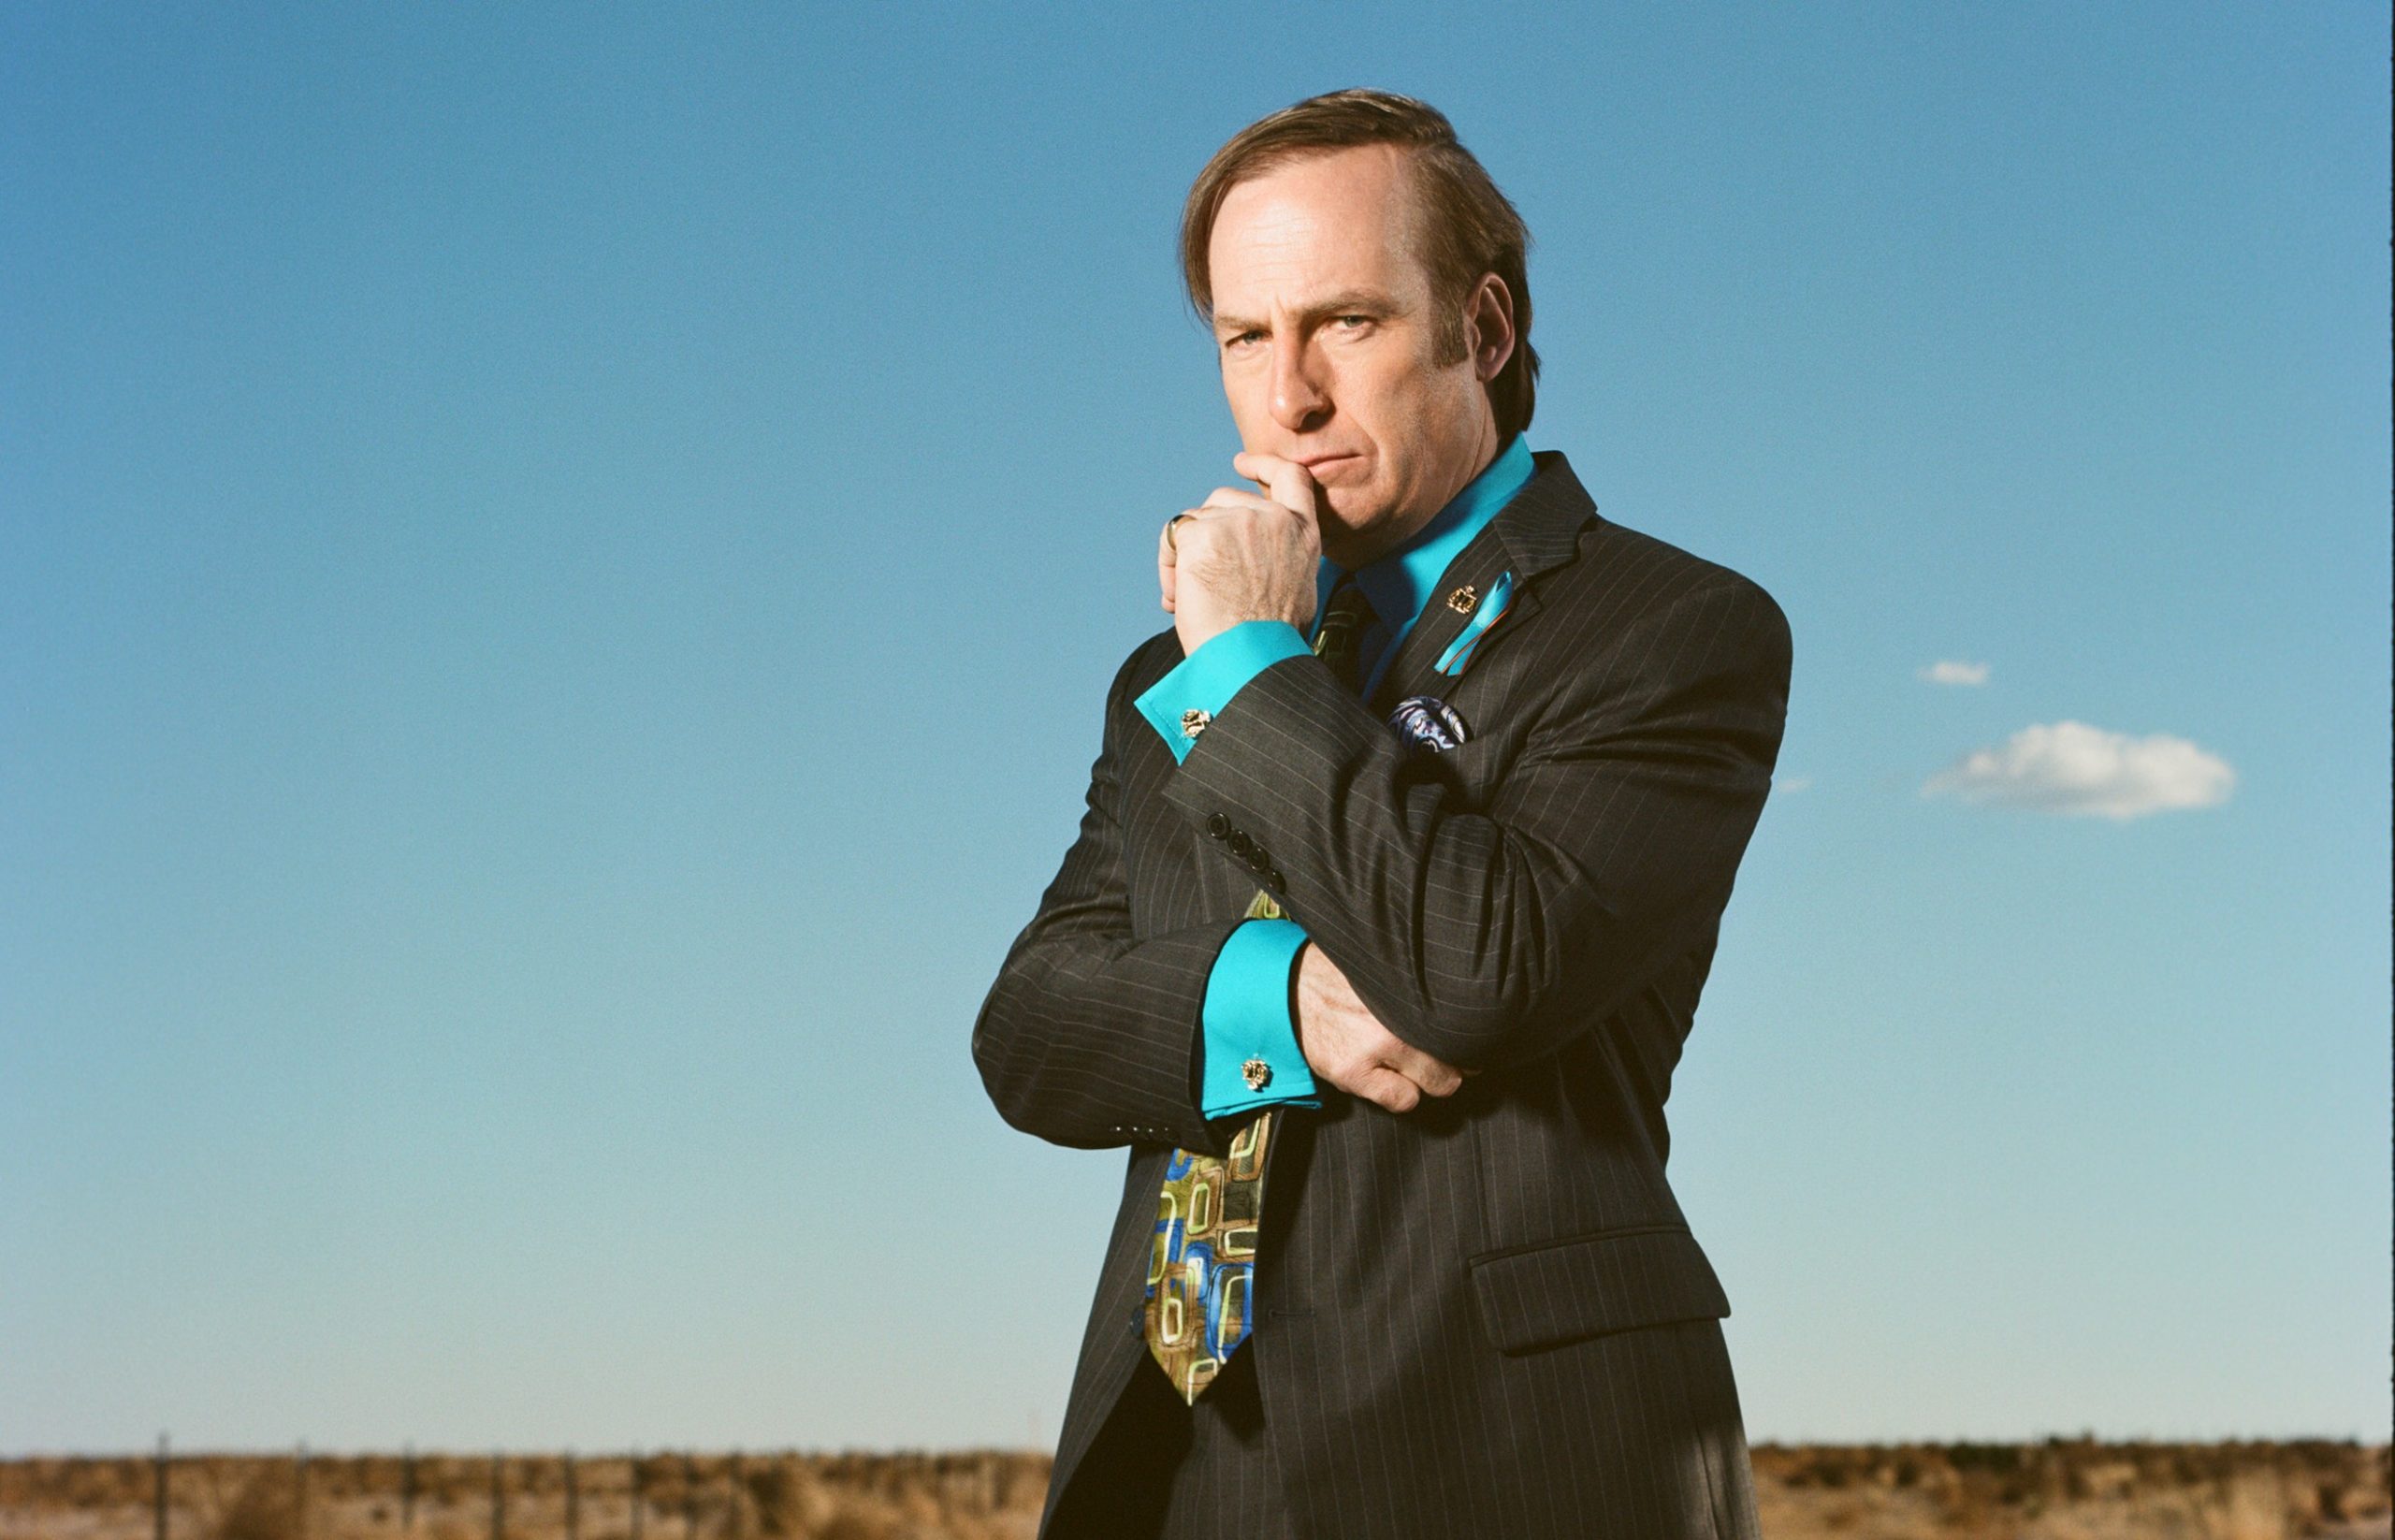 Here's Our First Look at the Breaking Bad Spin-Off Better Call Saul